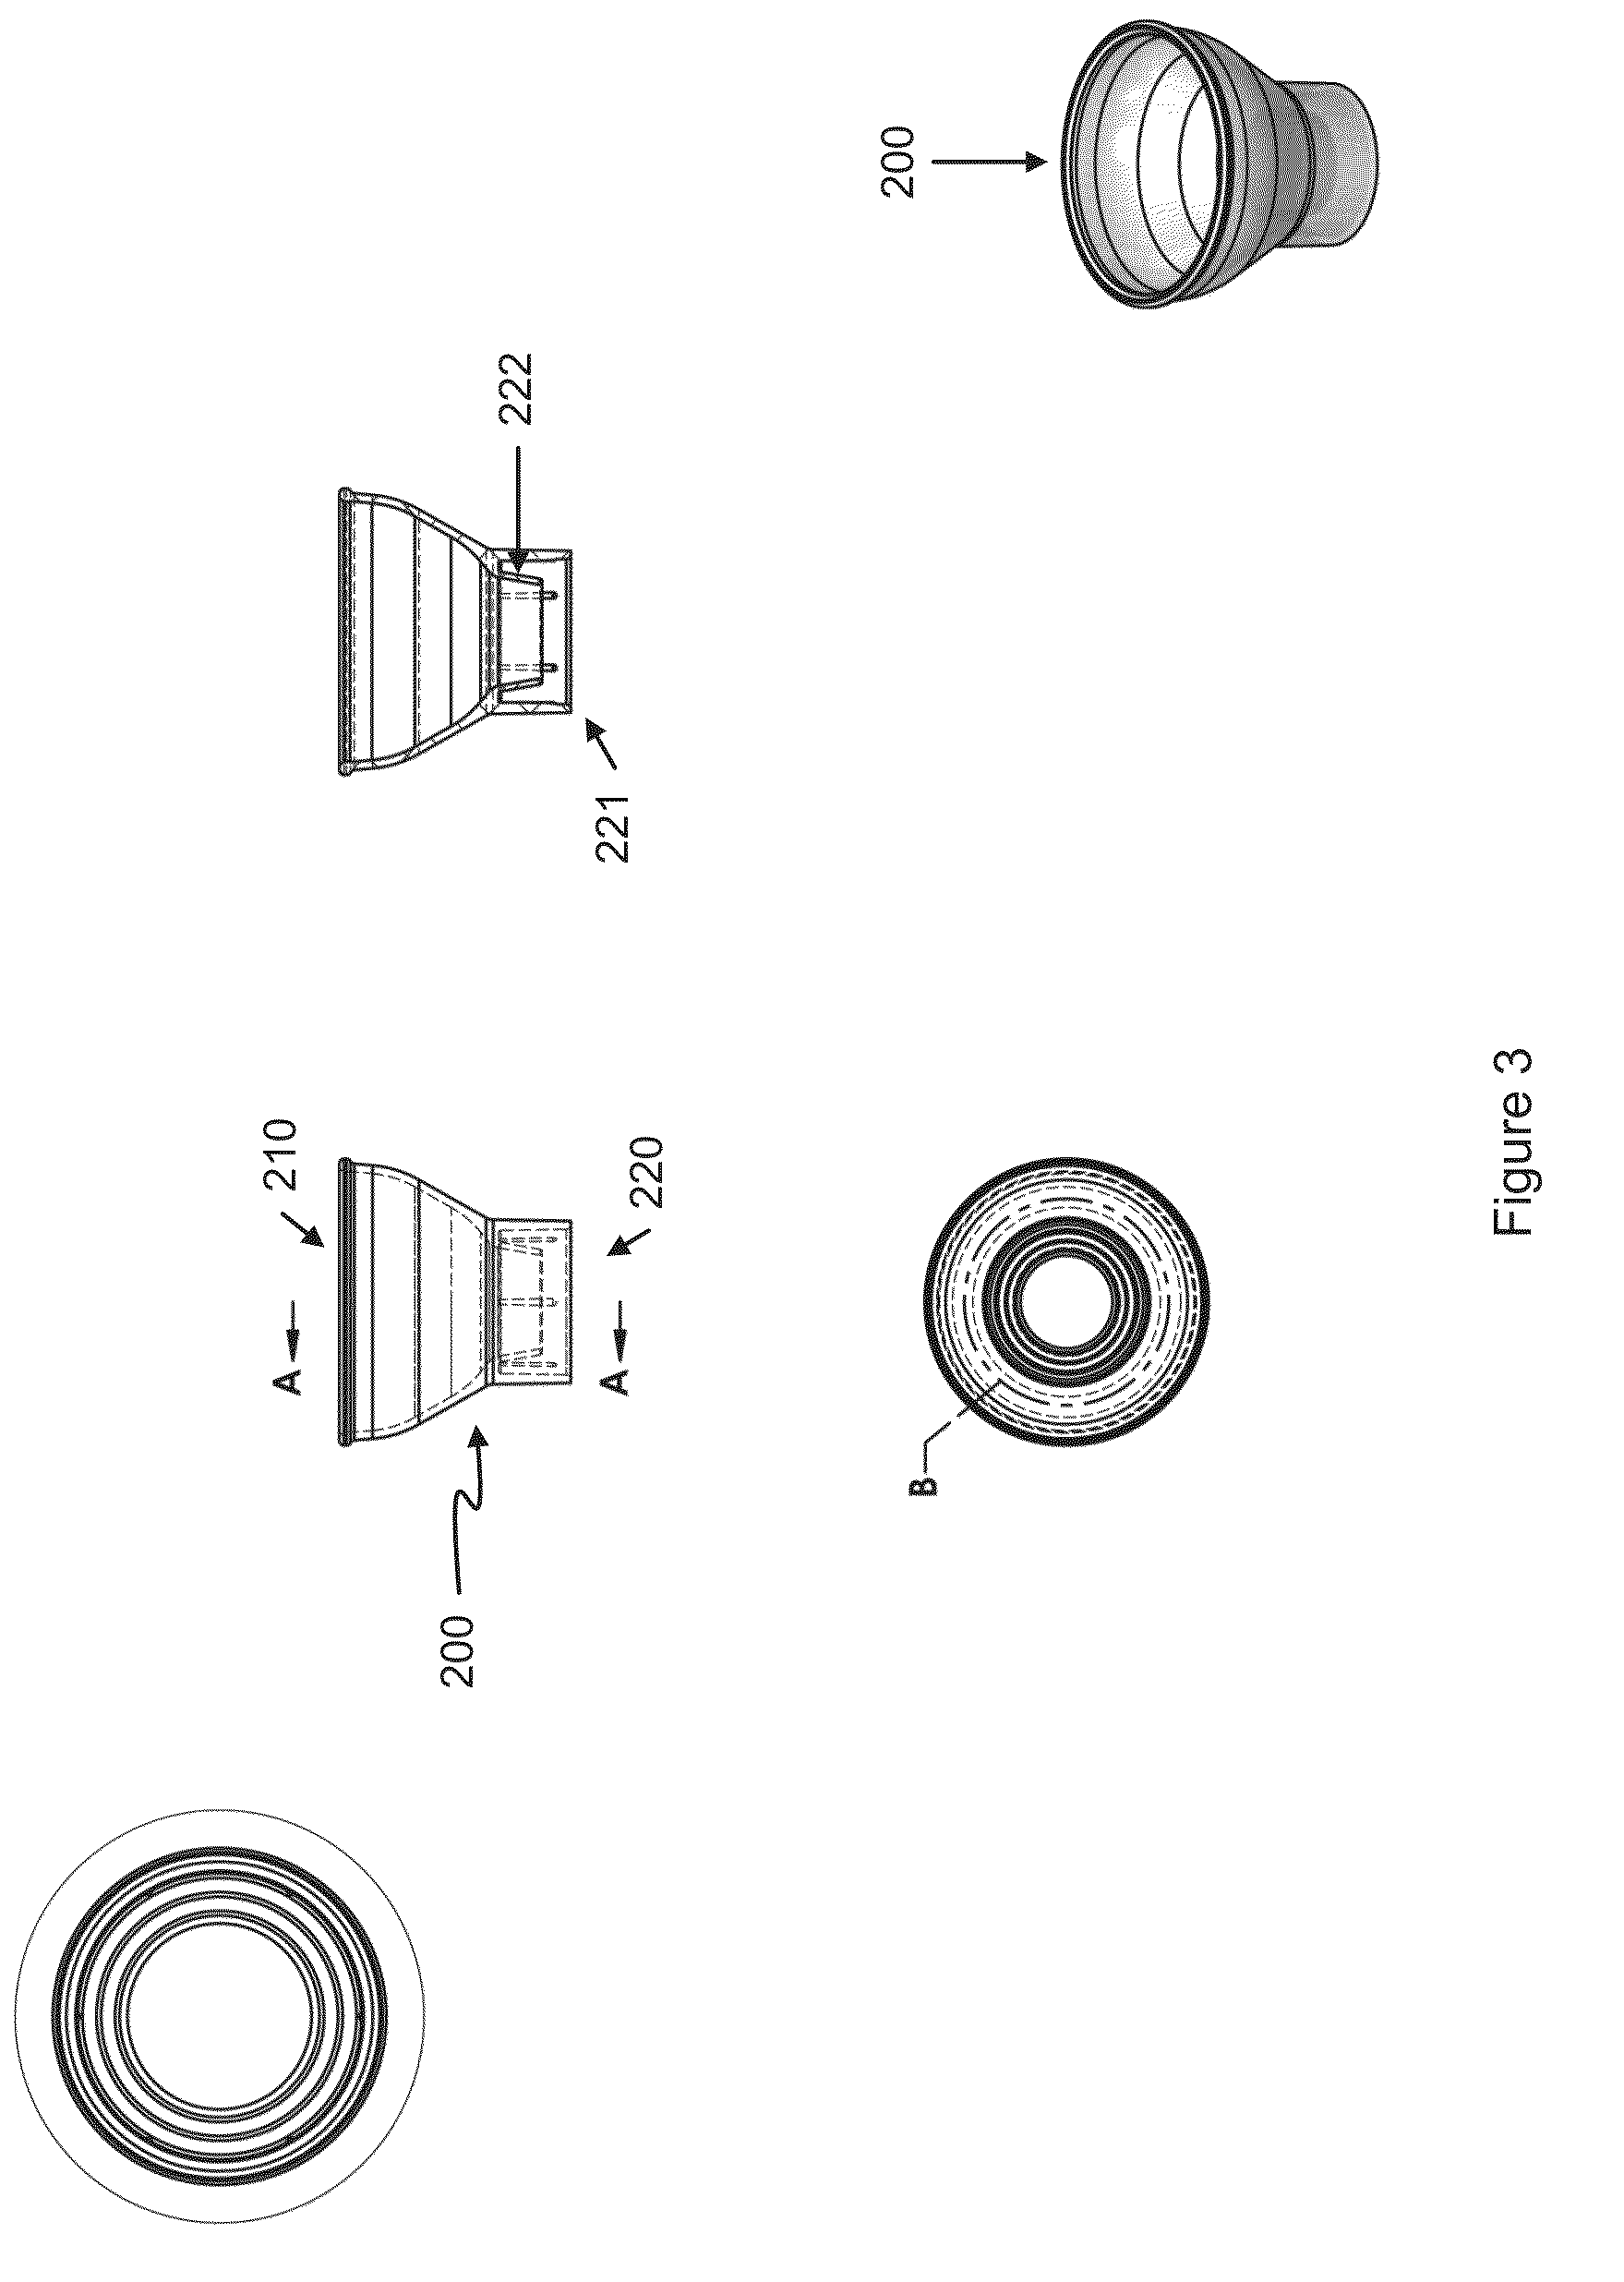 Sample collection device